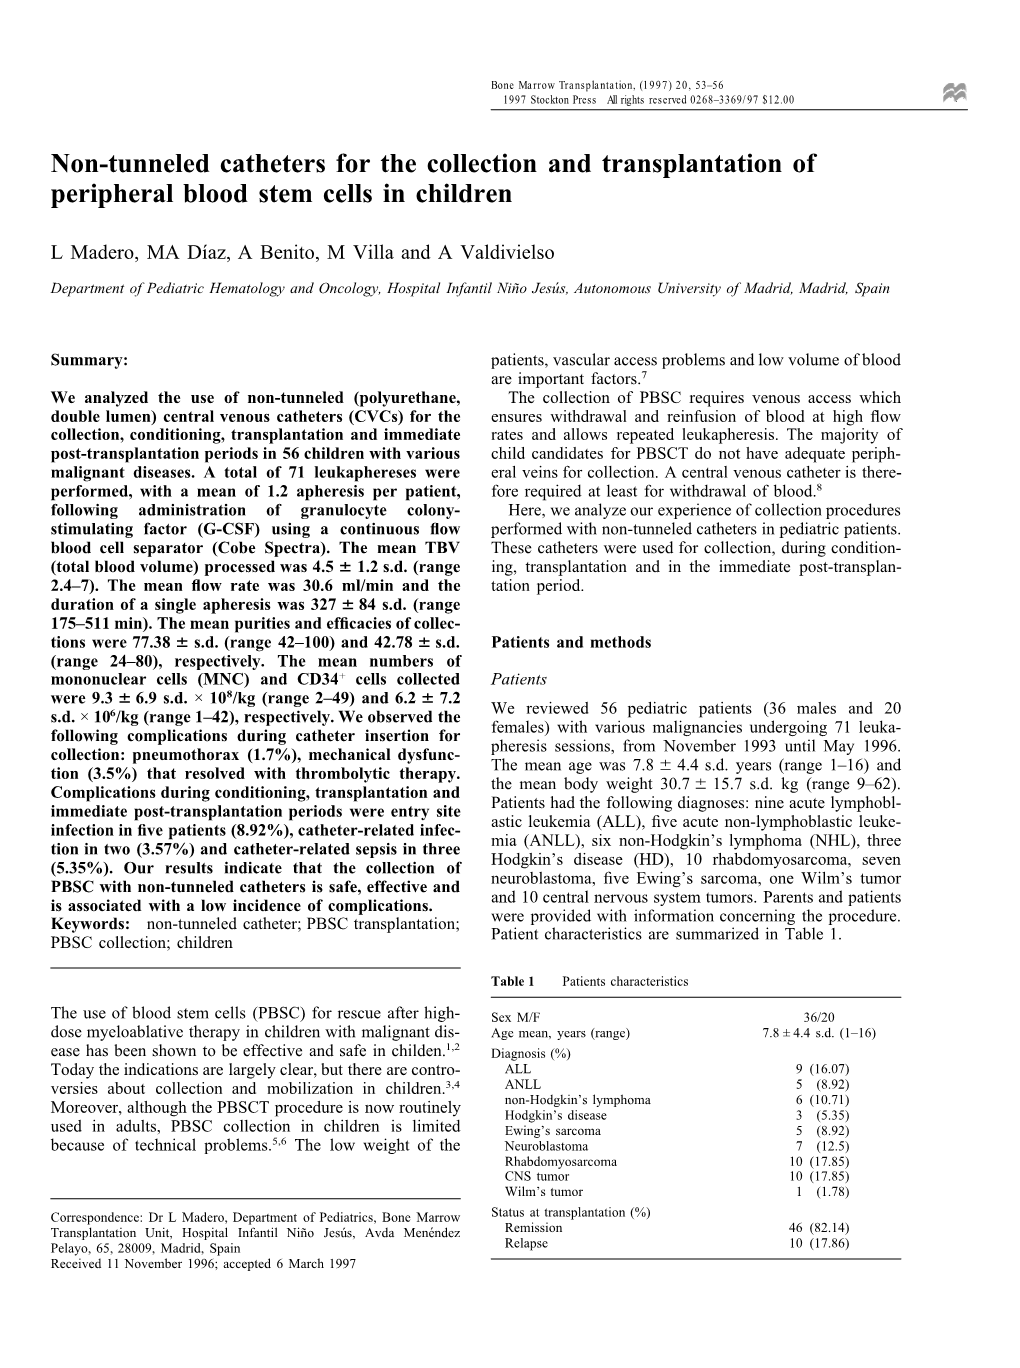 Non-Tunneled Catheters for the Collection and Transplantation of Peripheral Blood Stem Cells in Children